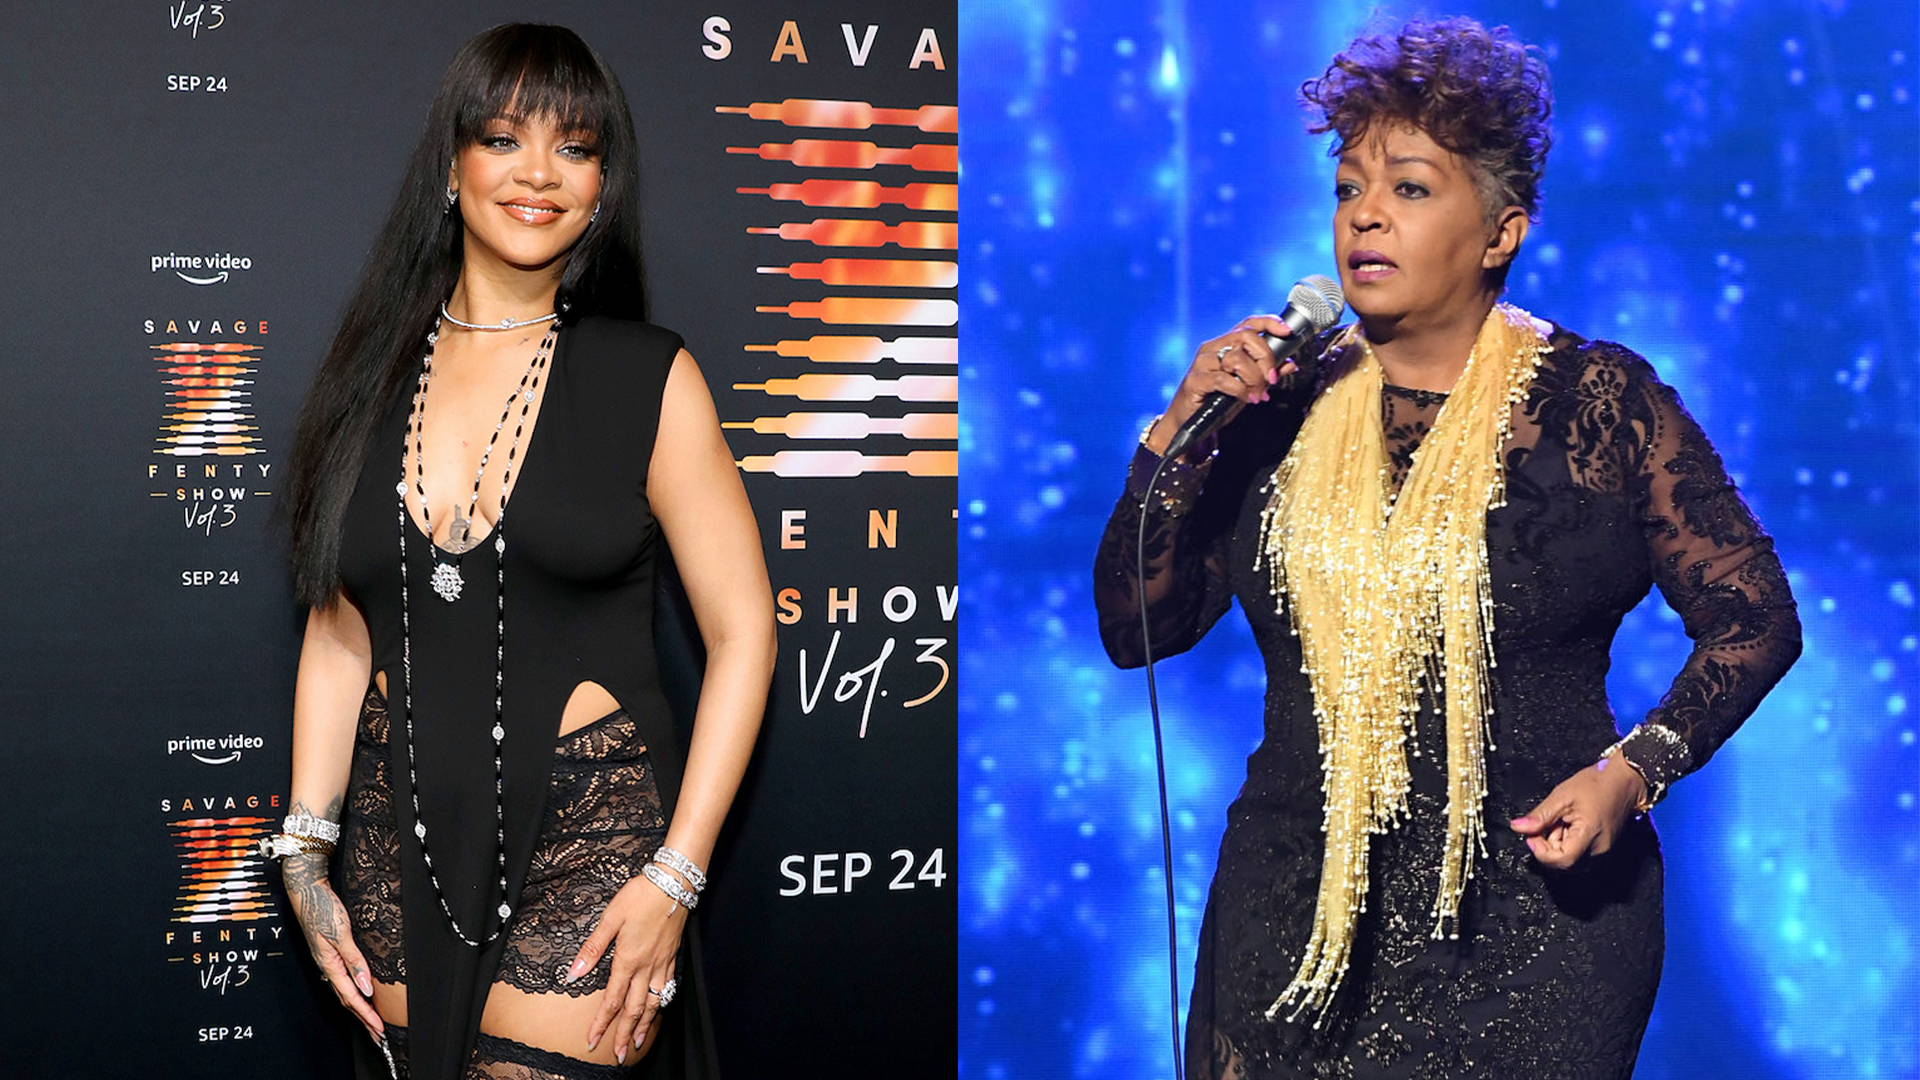 An Inside Look At How Anita Baker, Rihanna, And More Acquired Their Master Recordings